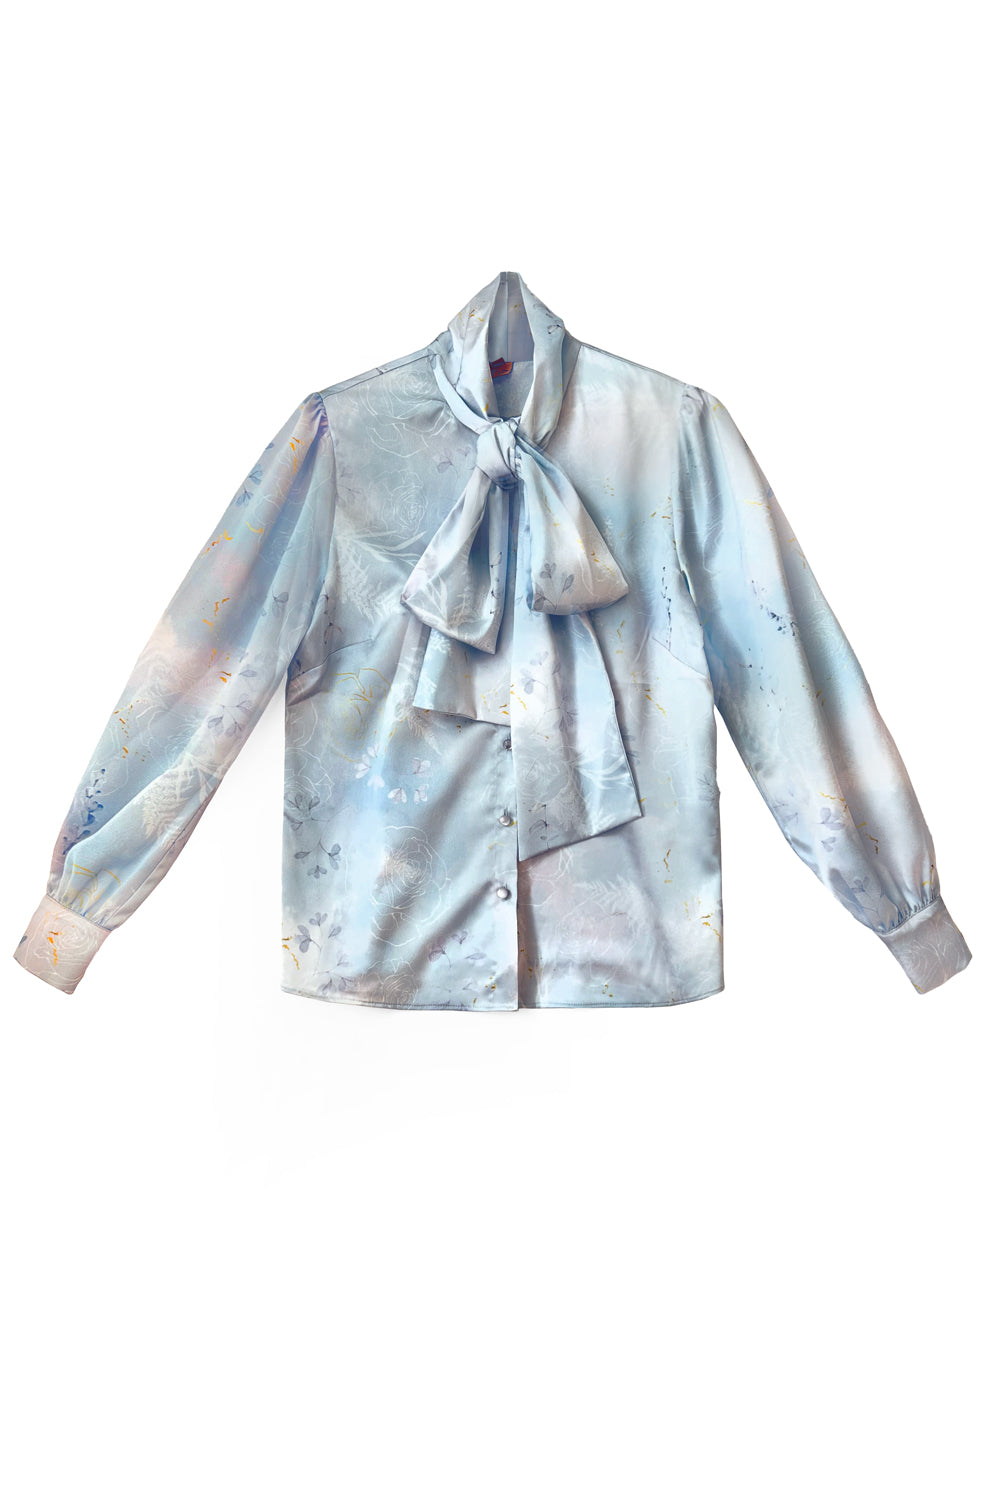 Shirt in pastel shades with a floral print